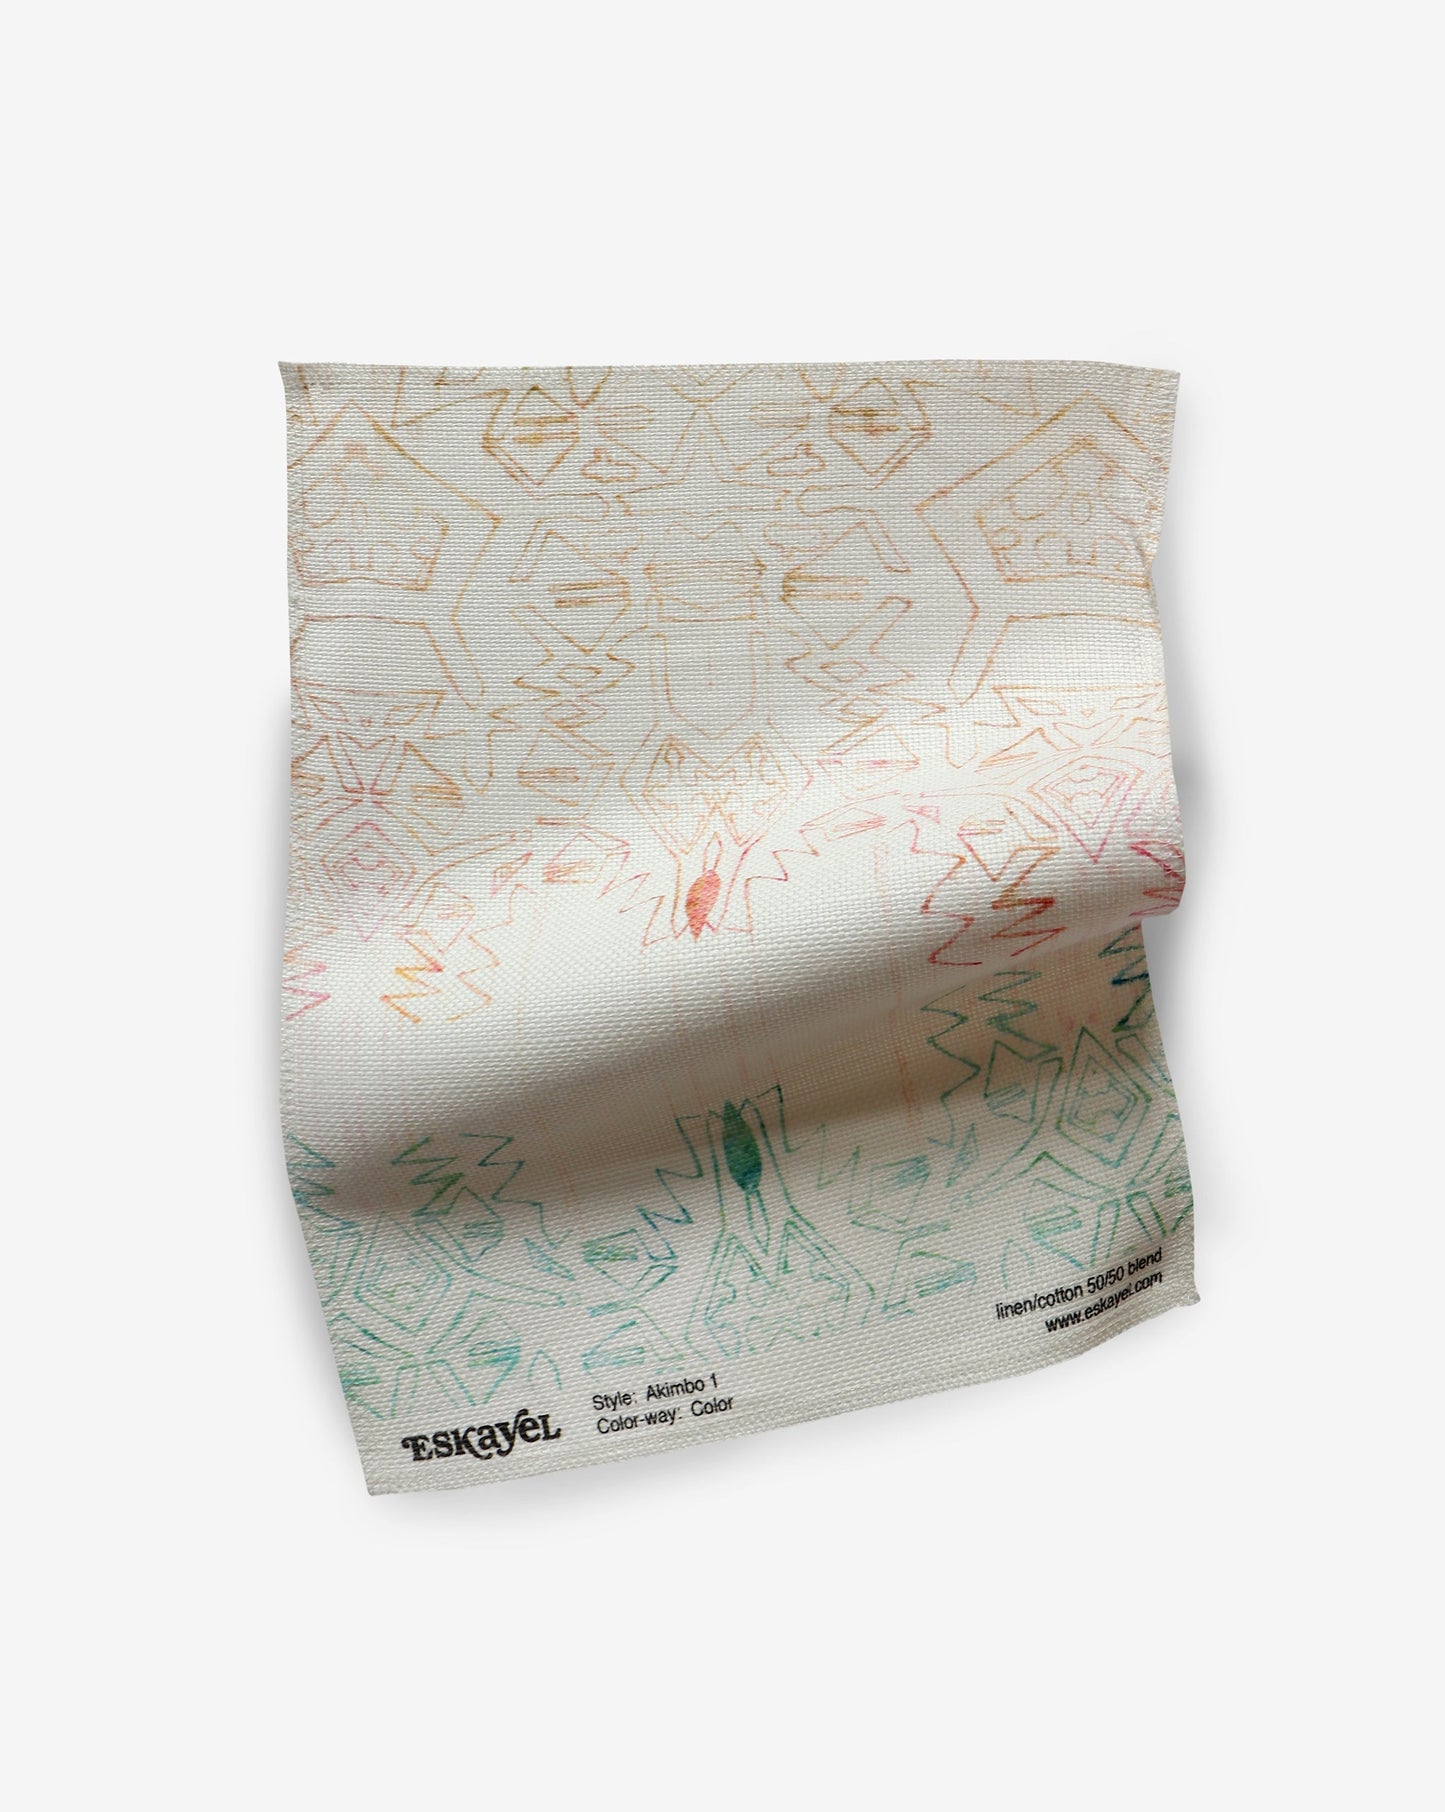 An Akimbo 1 Fabric Sample Color with a design on it can be ordered as a sample